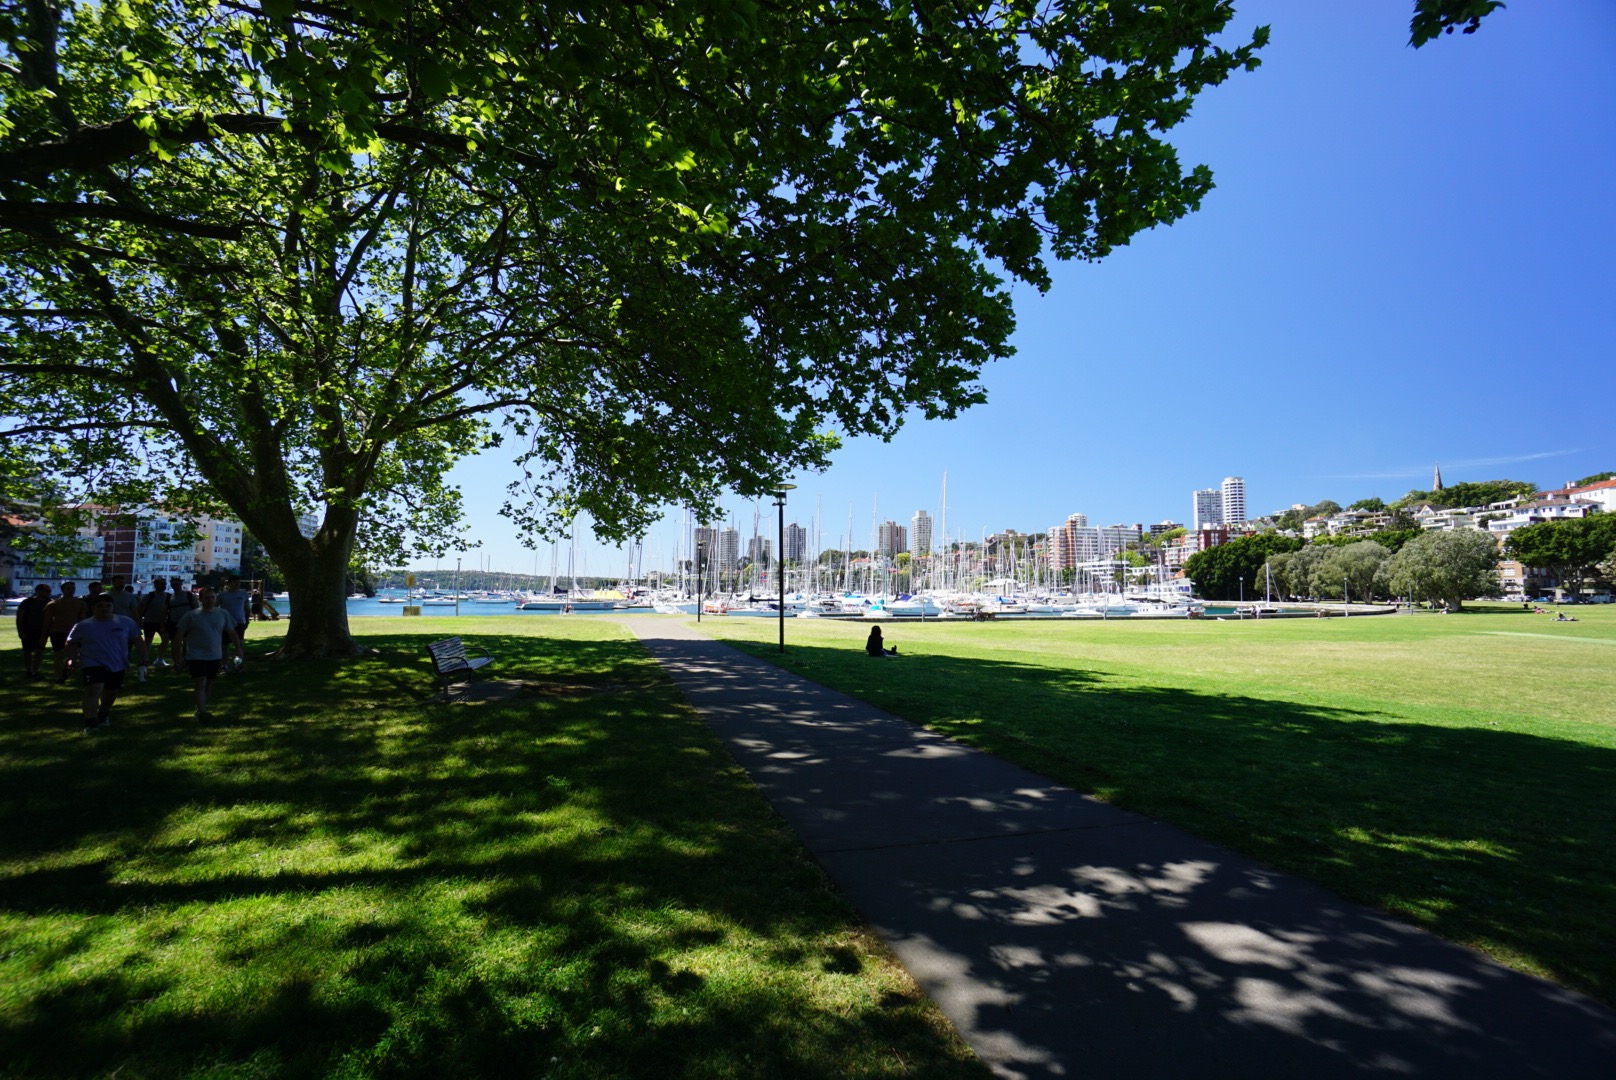 Rushcutters Bay Park